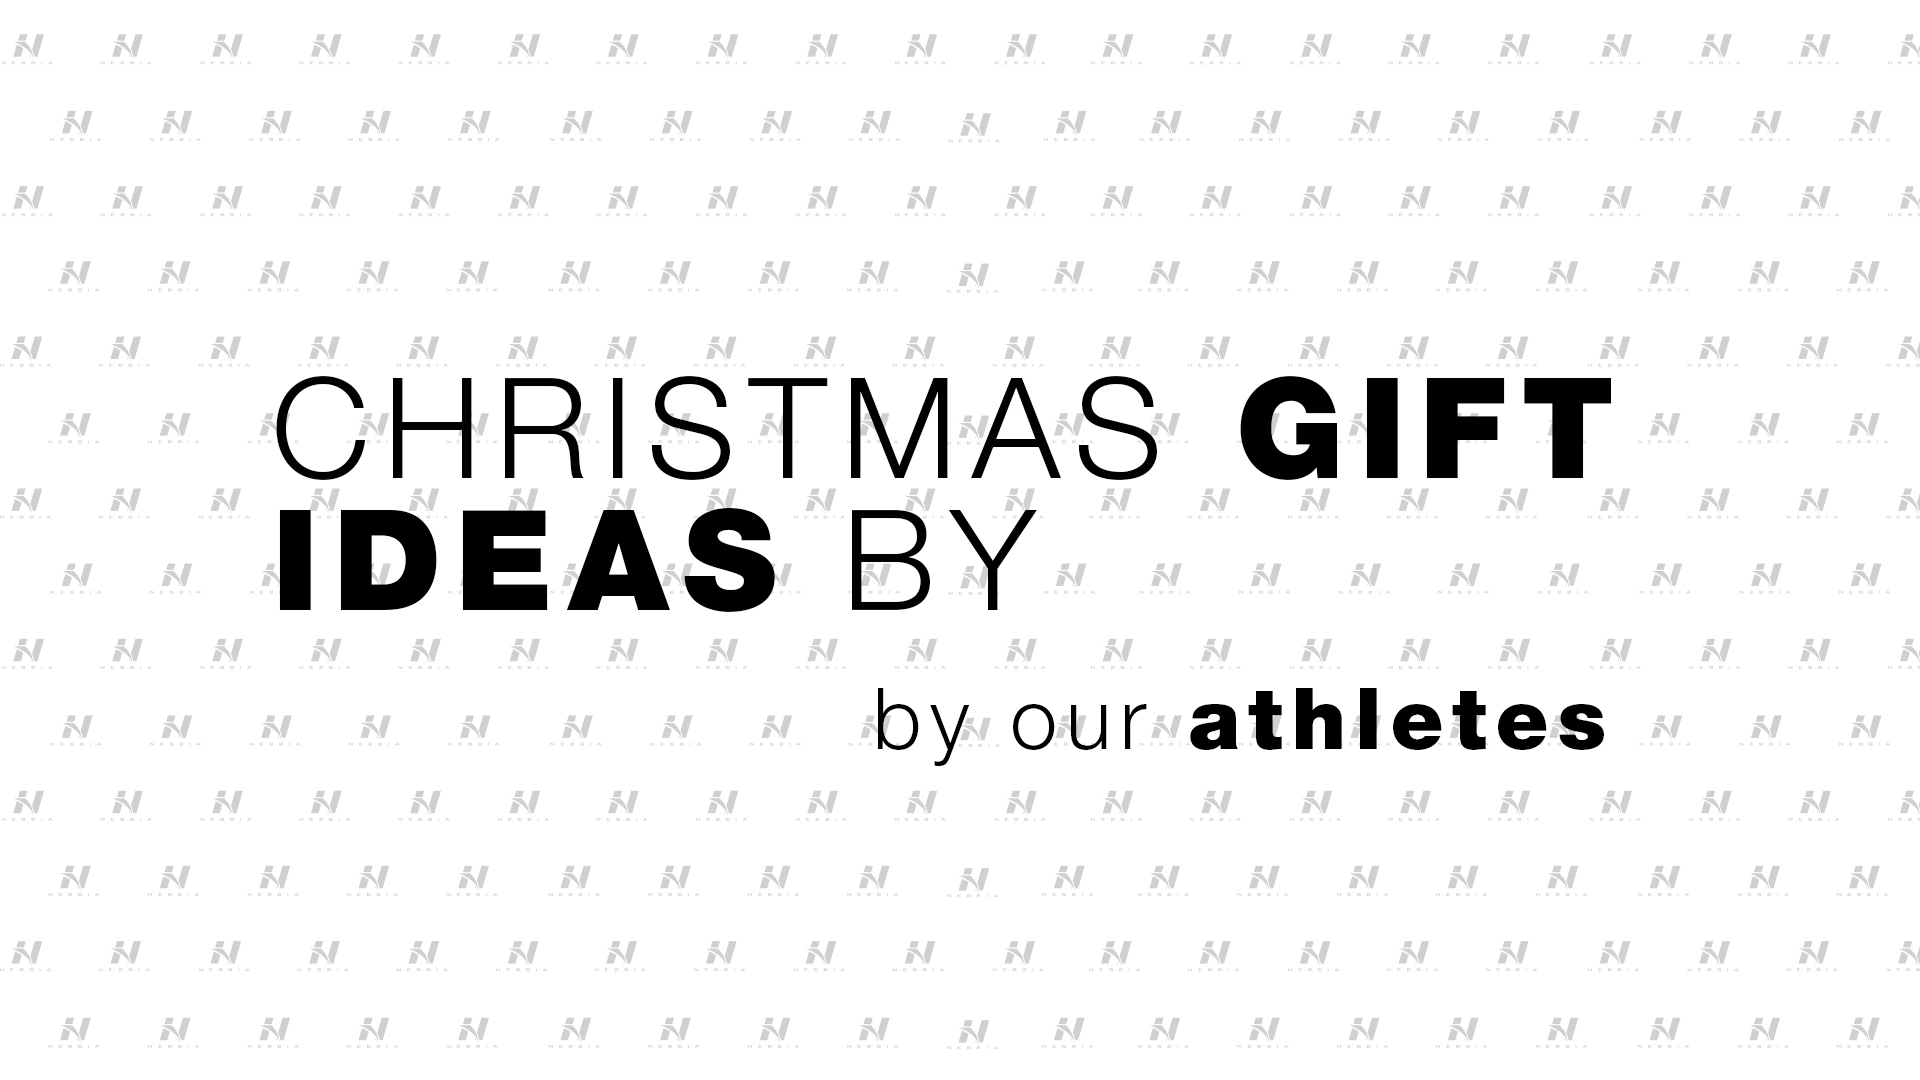 CHRISTMAS GIFT IDEAS BY OUR ATHLETES